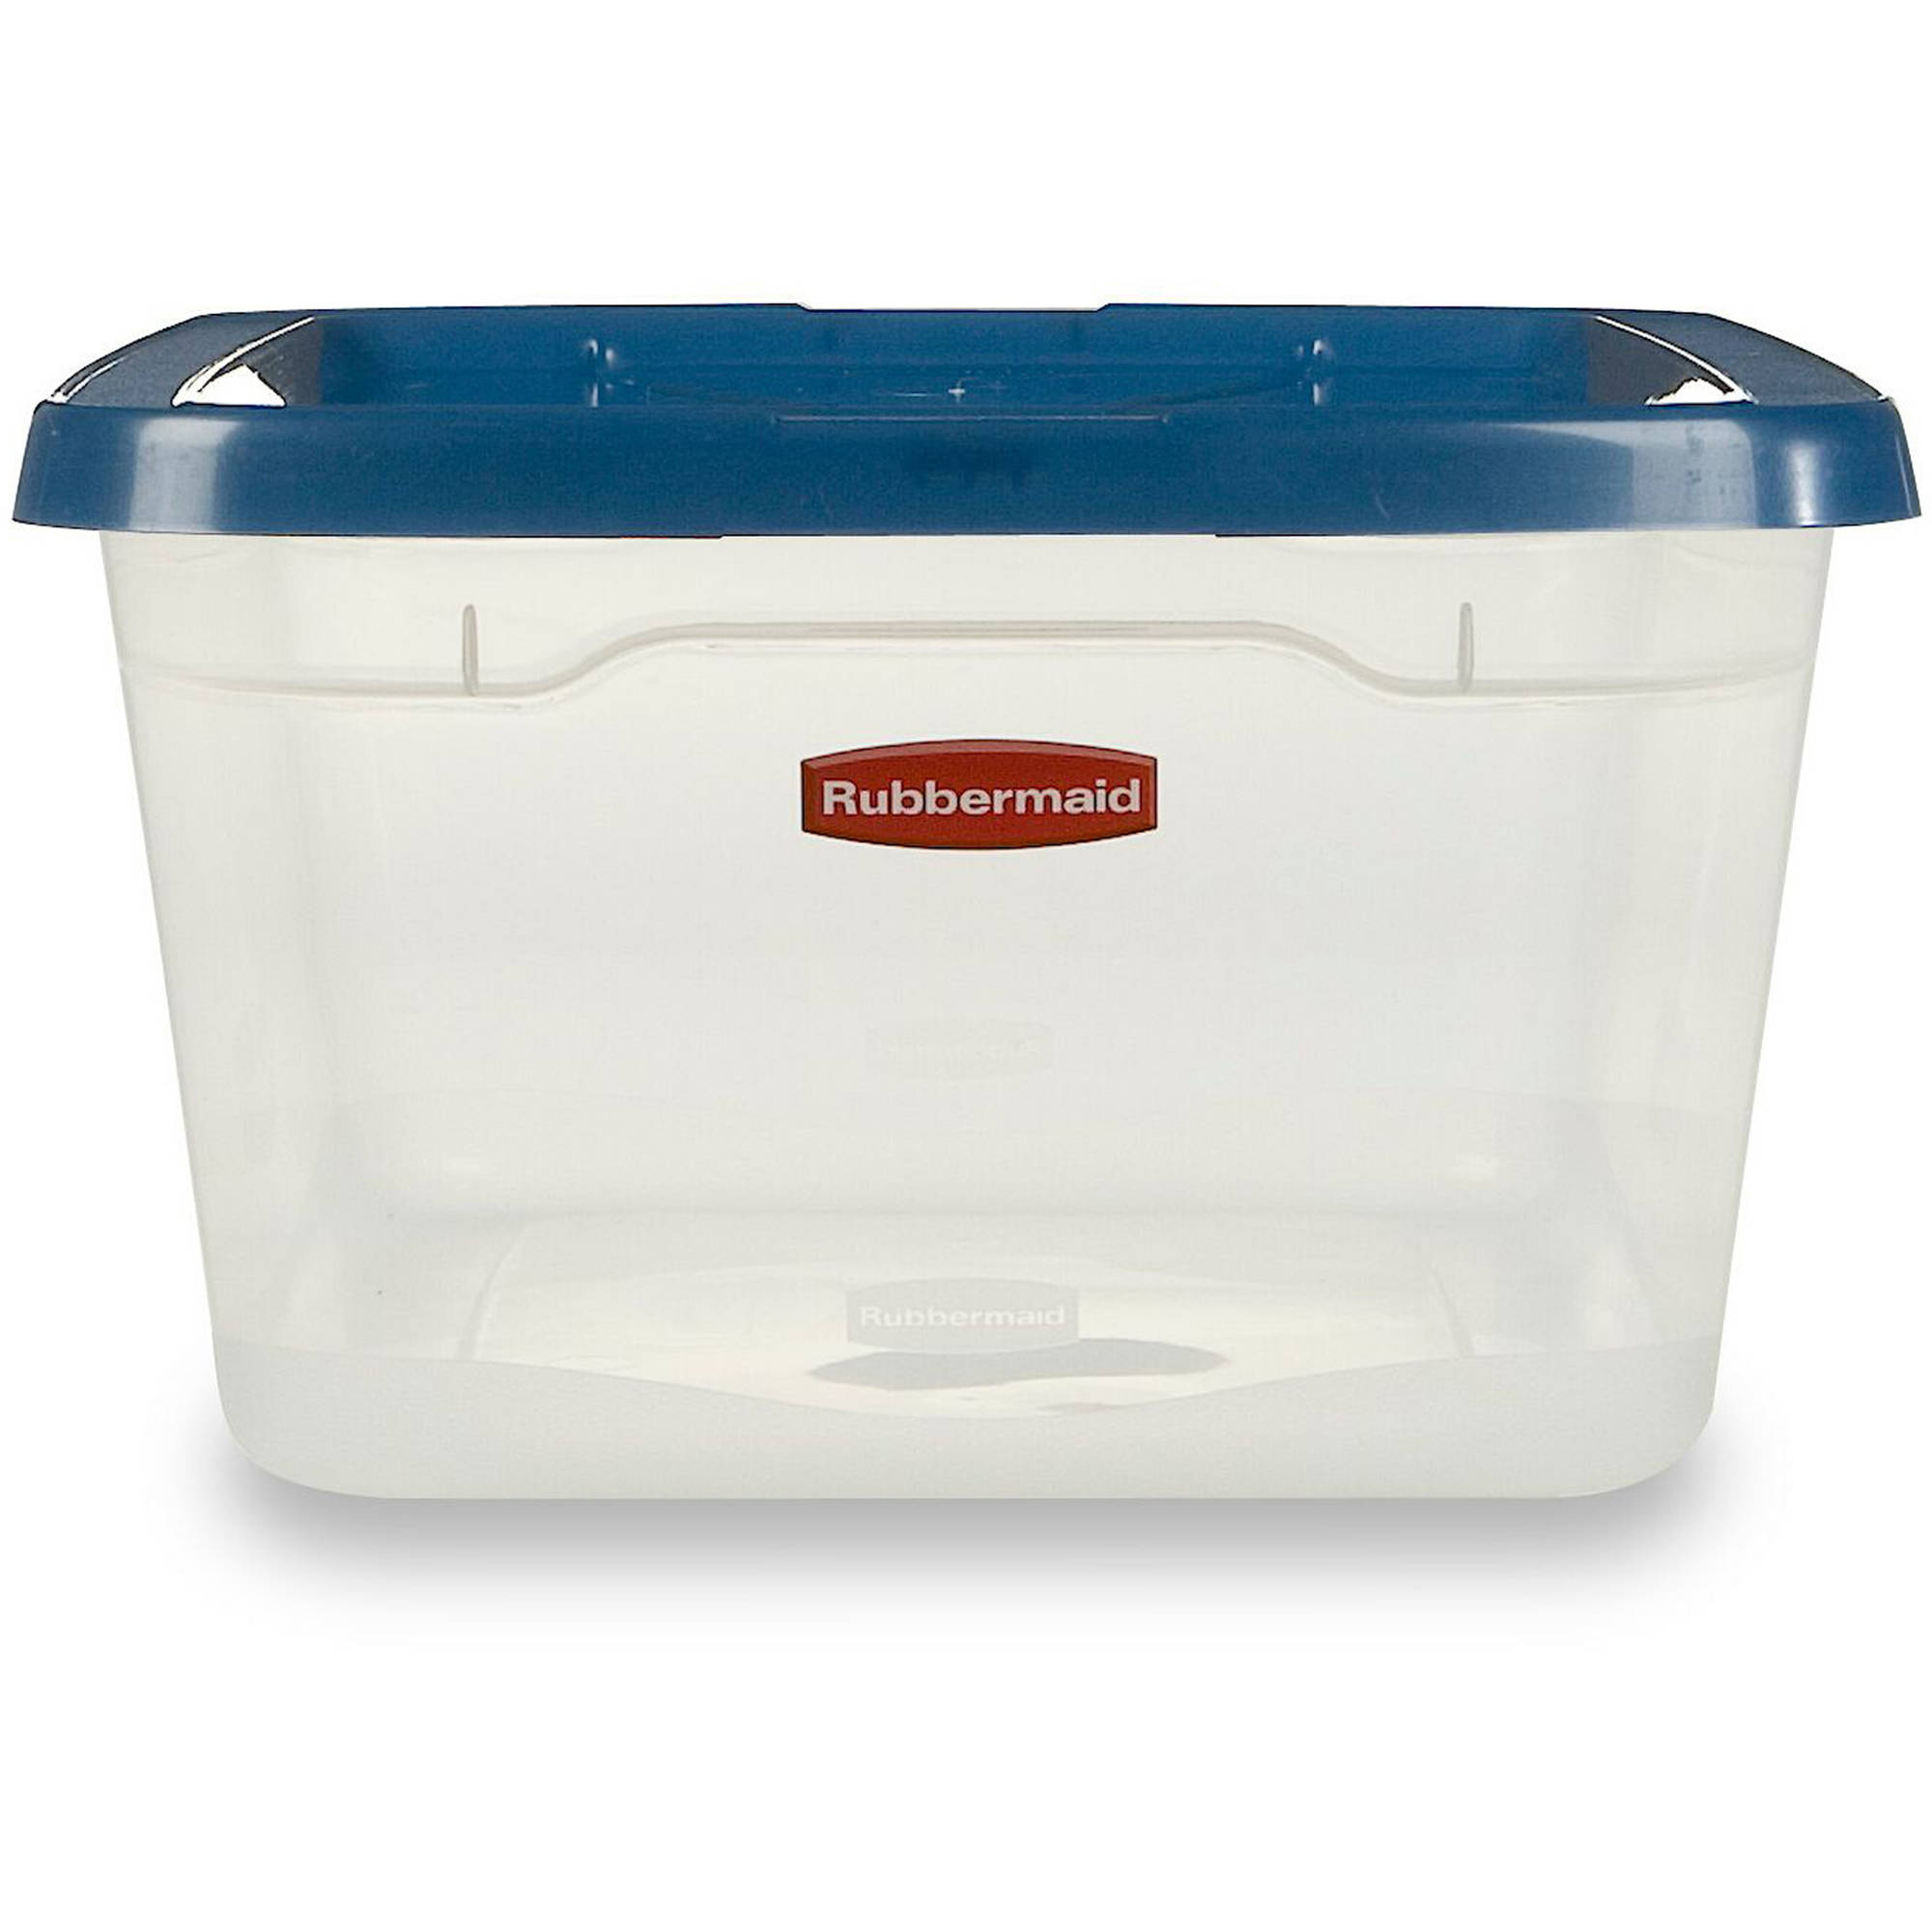 Rubbermaid Clever Store Clears Storage Container, 6.5 qt, 10-Pack, Clear with Blue Lid - image 2 of 2